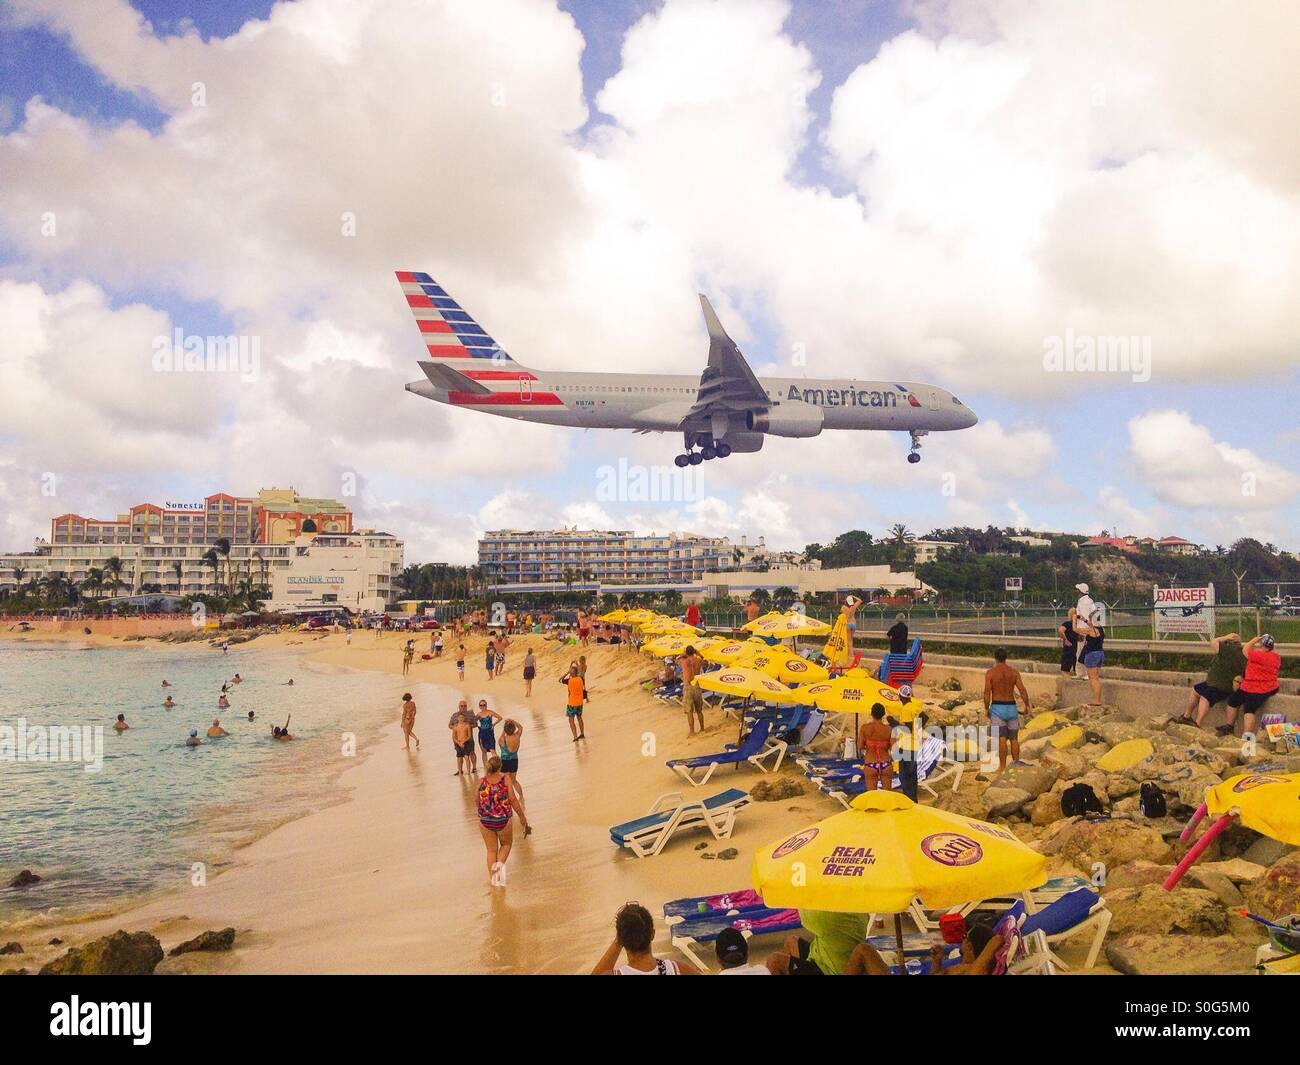 Plane coming in to land over Maho beach on Saint Maarten, Caribbean Stock Photo